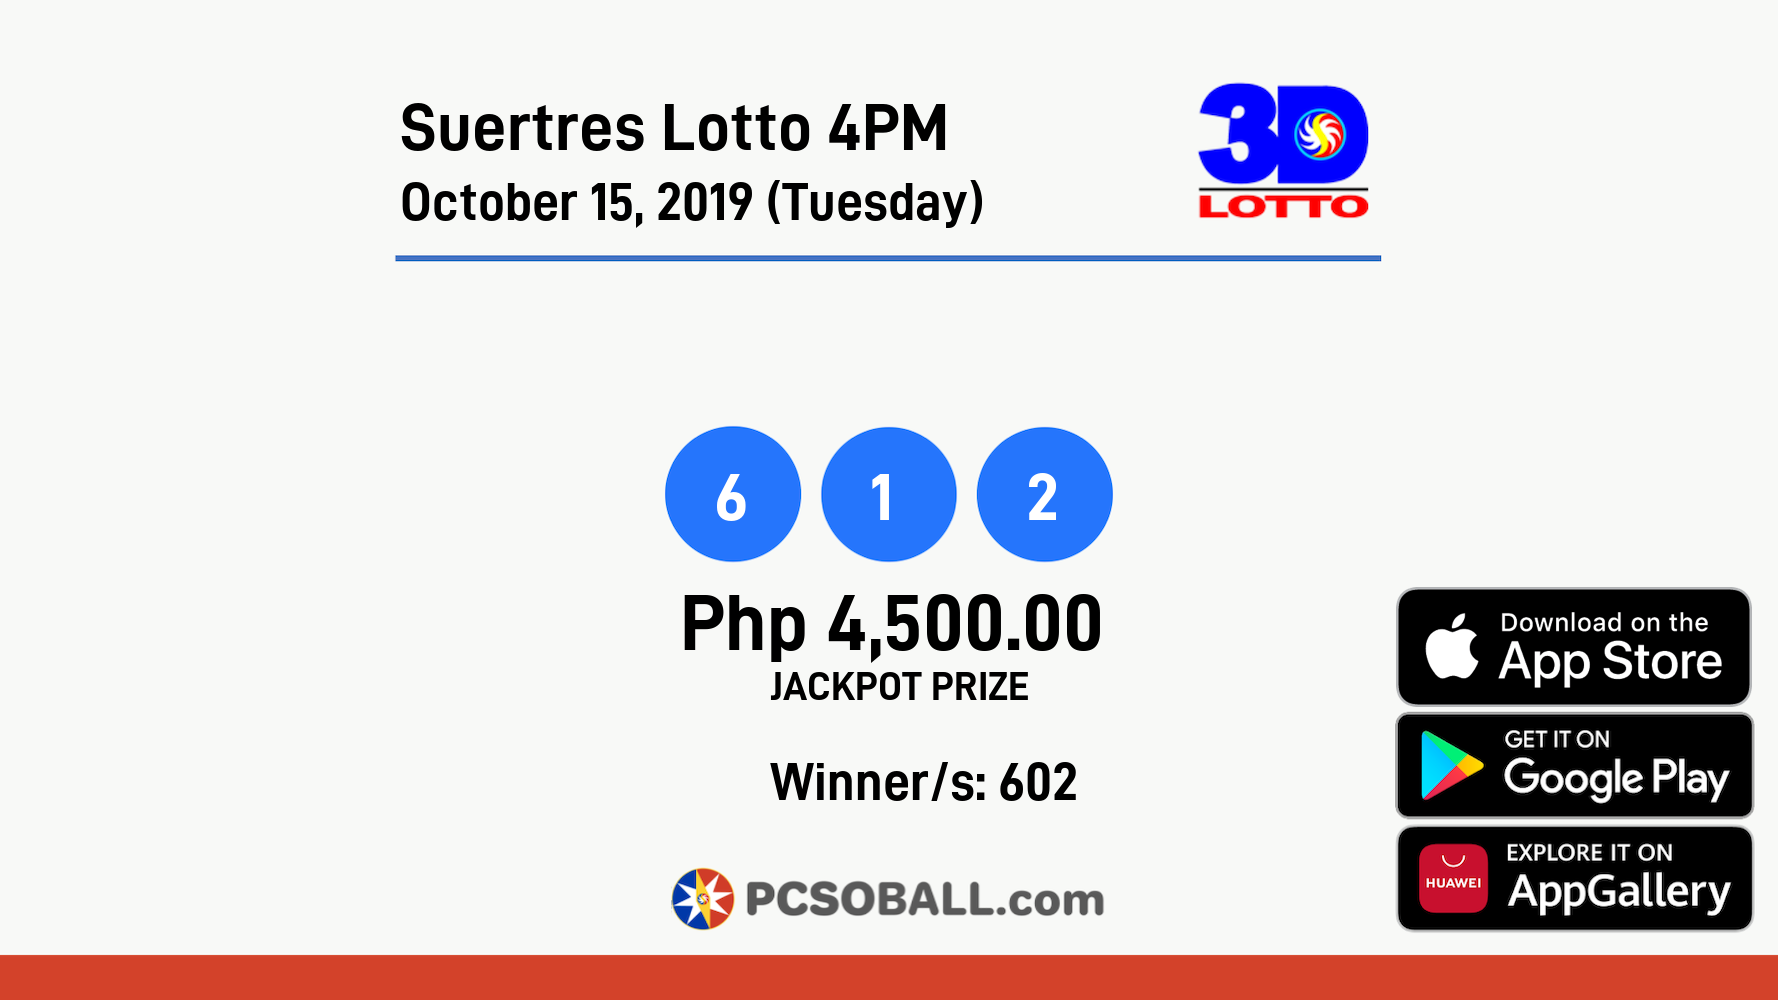 Suertres Lotto 4PM October 15, 2019 (Tuesday) Result